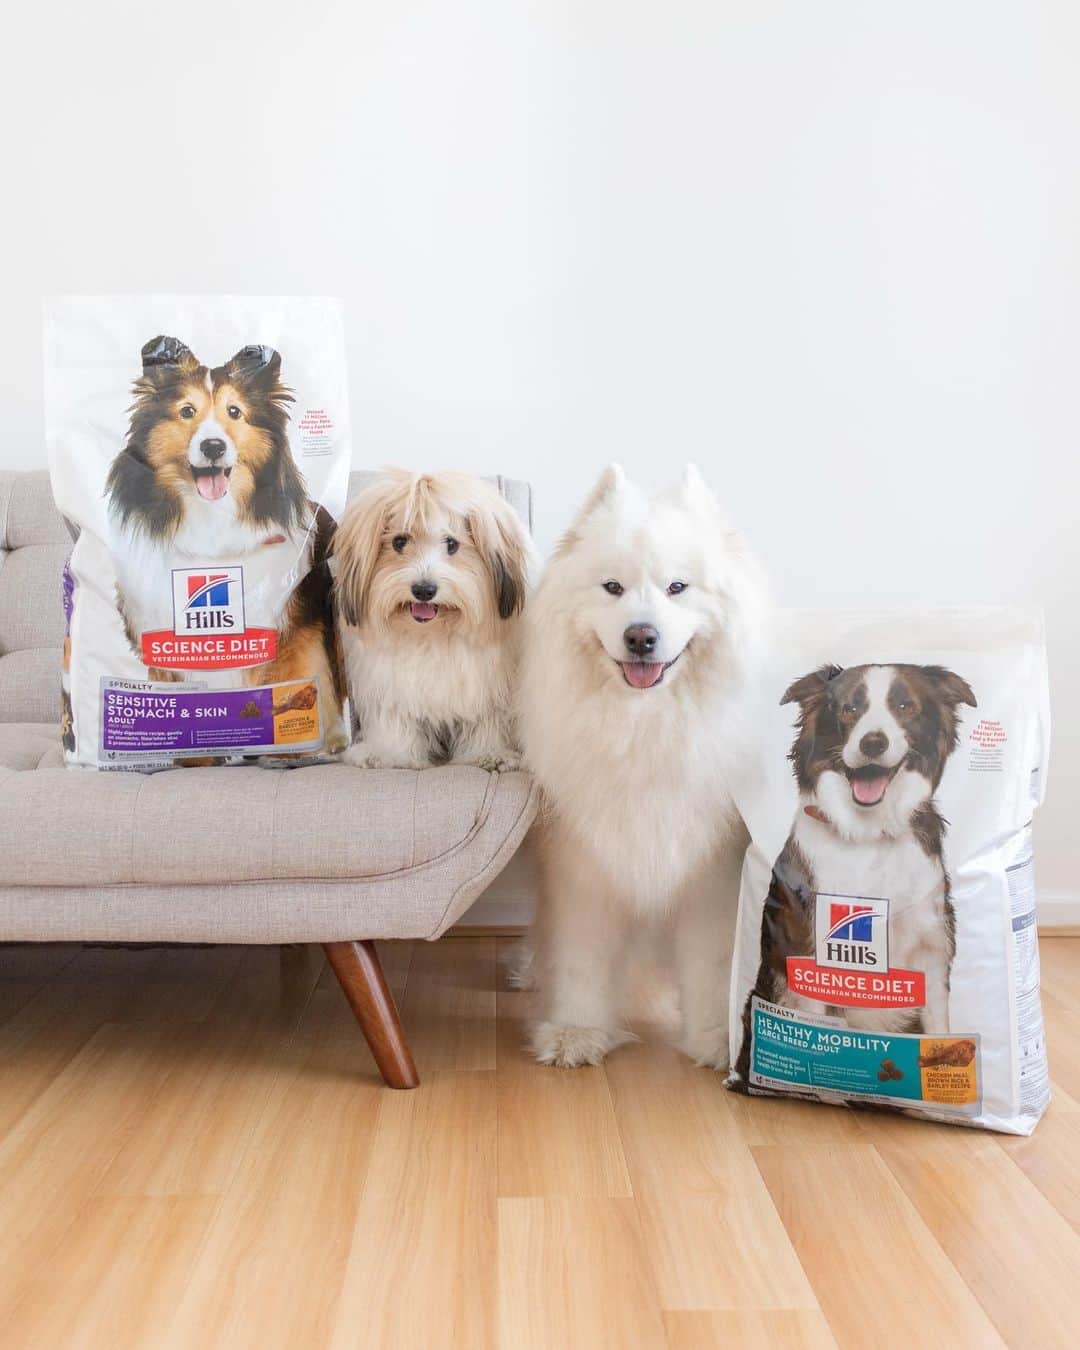 Loki the Corgiのインスタグラム：「[#HillsPartner] Finding the right food to suit your dog's needs can be hard, but @HillsPet Nutrition and their Science Diet recipes make it easy! Bear's joint health is getting increasingly important as he gets older, which is why we feed him Hill's Science Diet Healthy Mobility. The taste keeps him happy, while the nutrition keeps his joints healthy! Momo, on the other hand, has a sensitive tummy, so we feed him Hill's Science Diet Sensitive Stomach & Skin. He's doing really well on it, plus he loves the taste! Click the link in our bio to learn more! #ad」